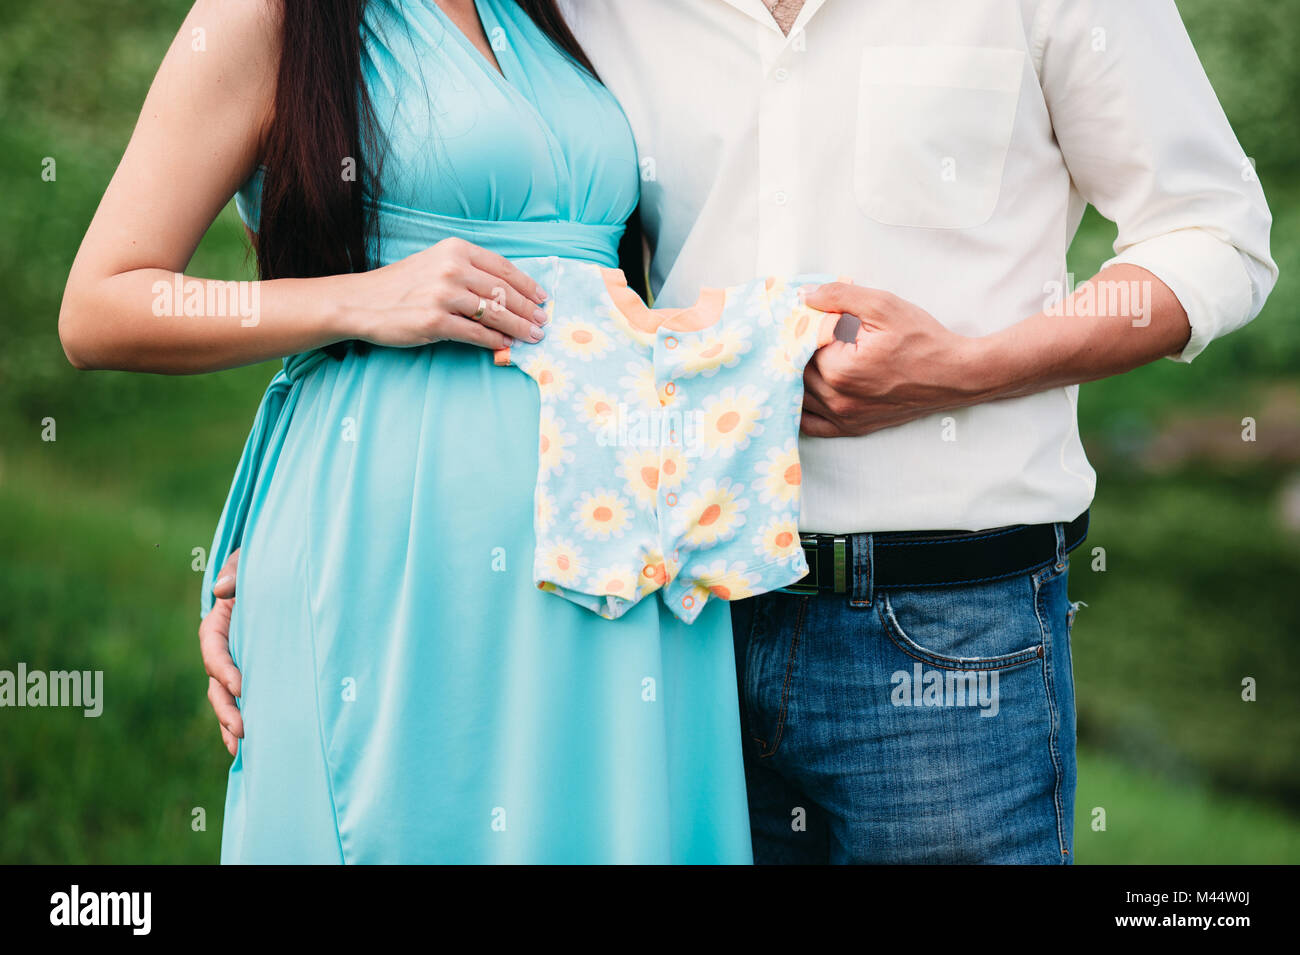 future paremts holding kids clothes near pregnant belly. Family, materniry, pregnancy concept. Closeup. Stock Photo